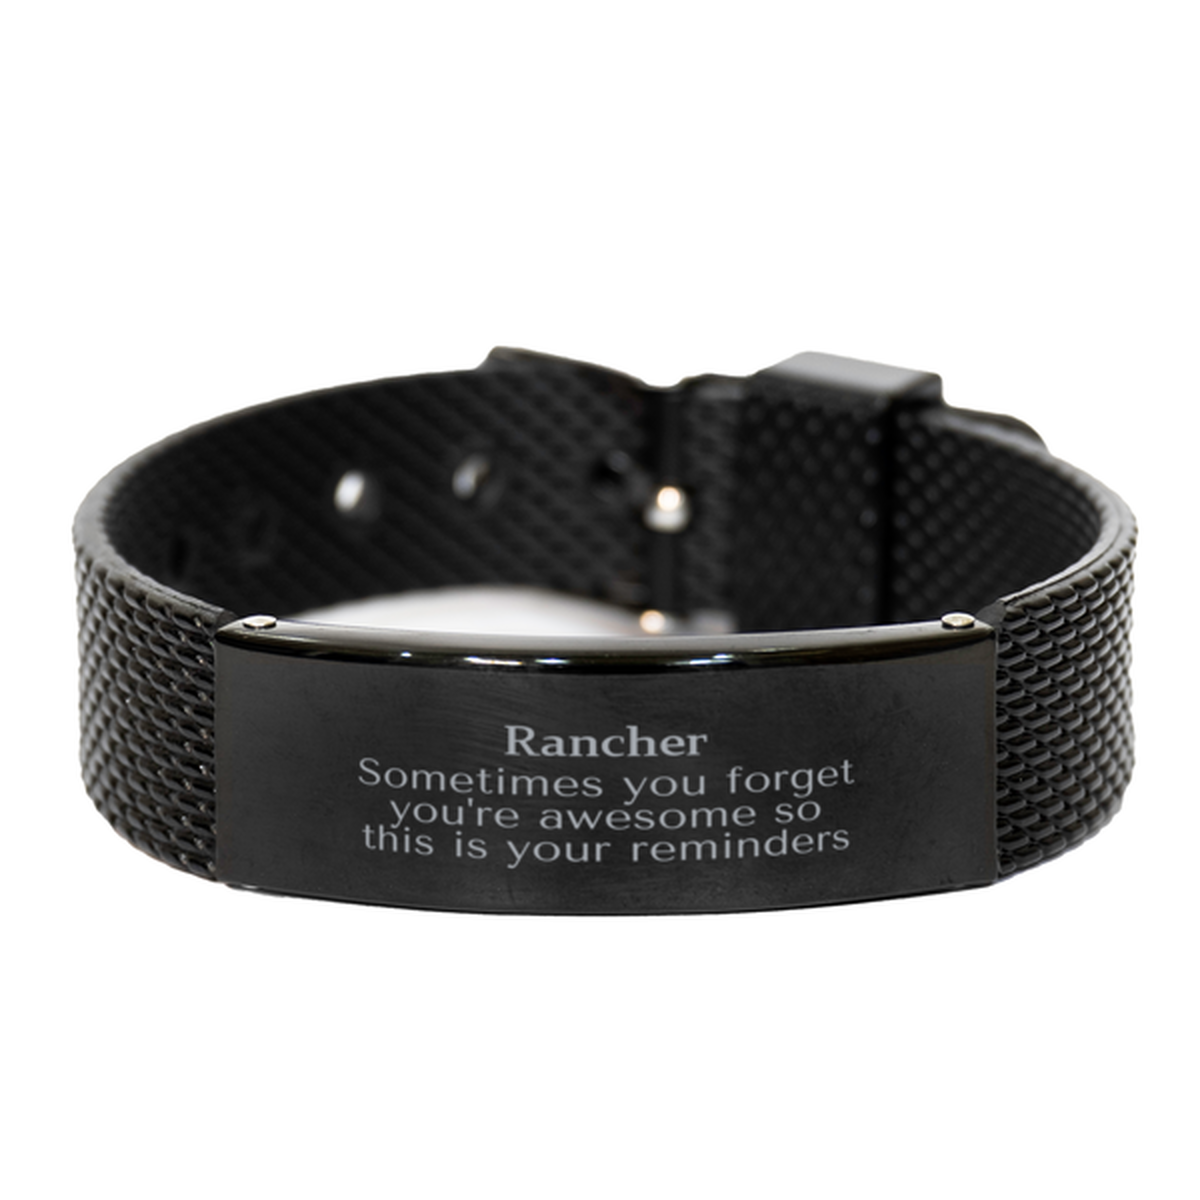 Sentimental Rancher Black Shark Mesh Bracelet, Rancher Sometimes you forget you're awesome so this is your reminders, Graduation Christmas Birthday Gifts for Rancher, Men, Women, Coworkers